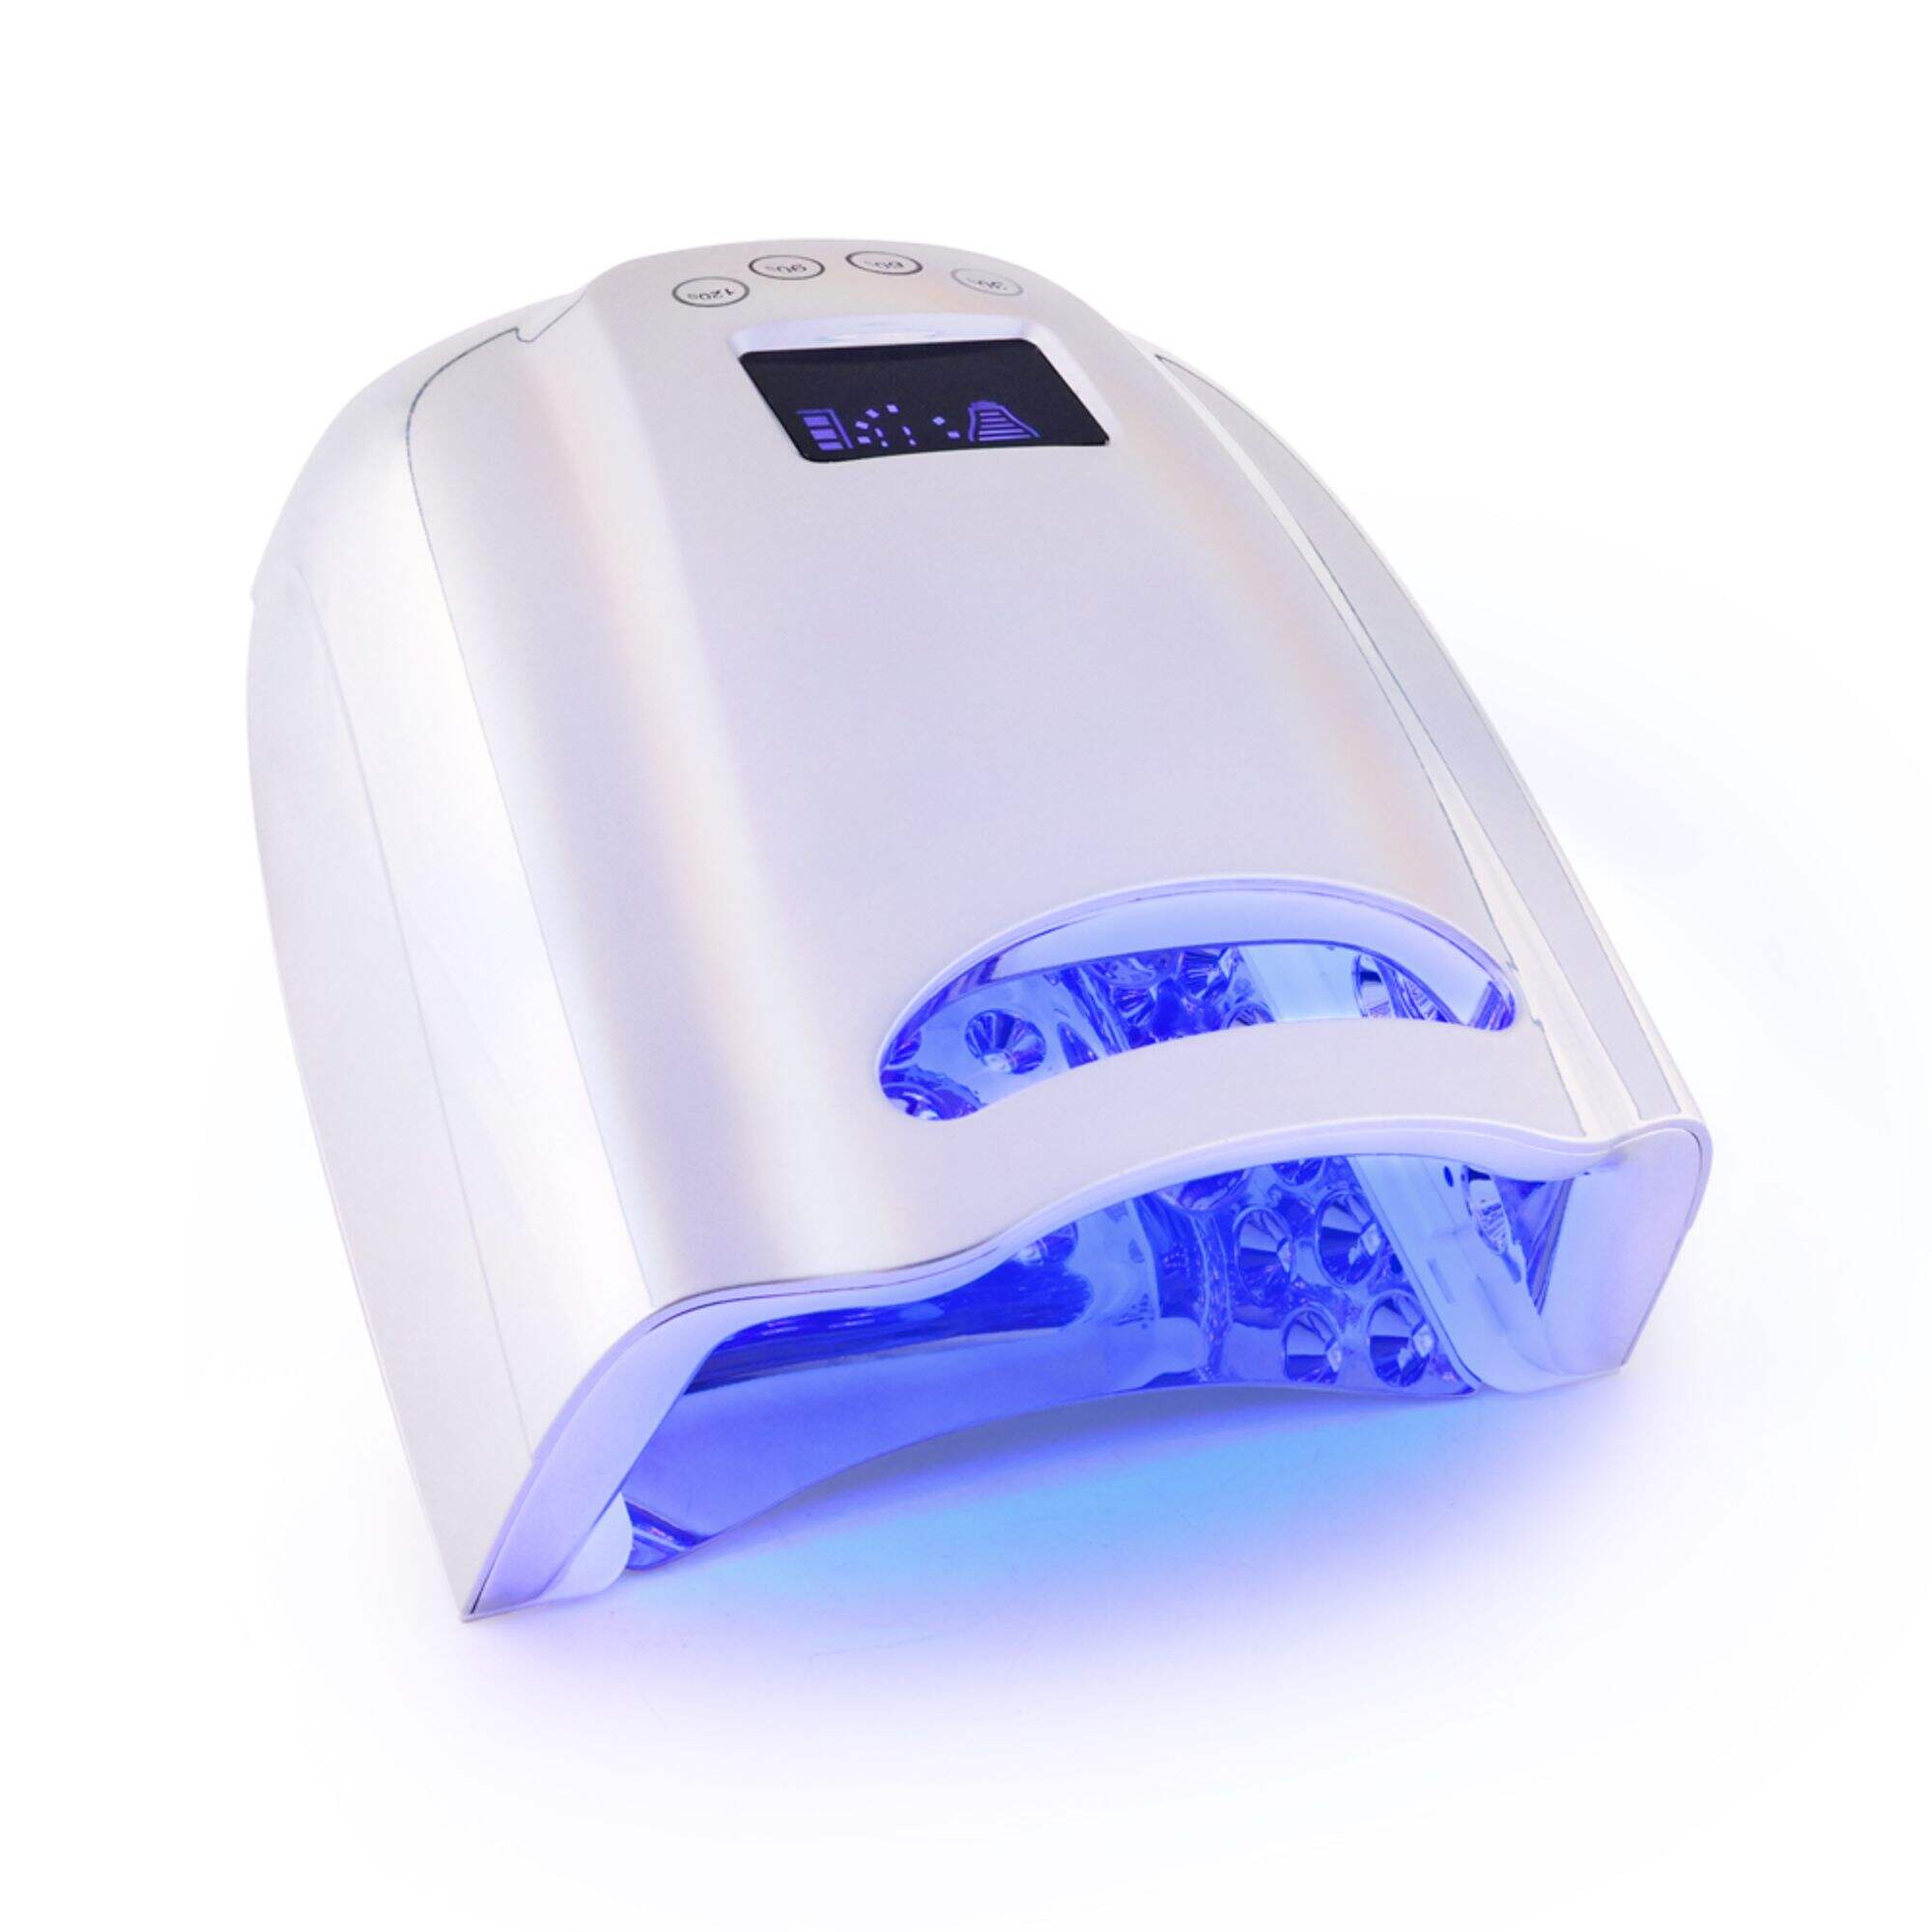 SN499 Advanced Nail Care Solution Cordless Pro Cure LED Lamp Professional 95w High-Intensity Light Fast-Drying for Manicure & Pedicure